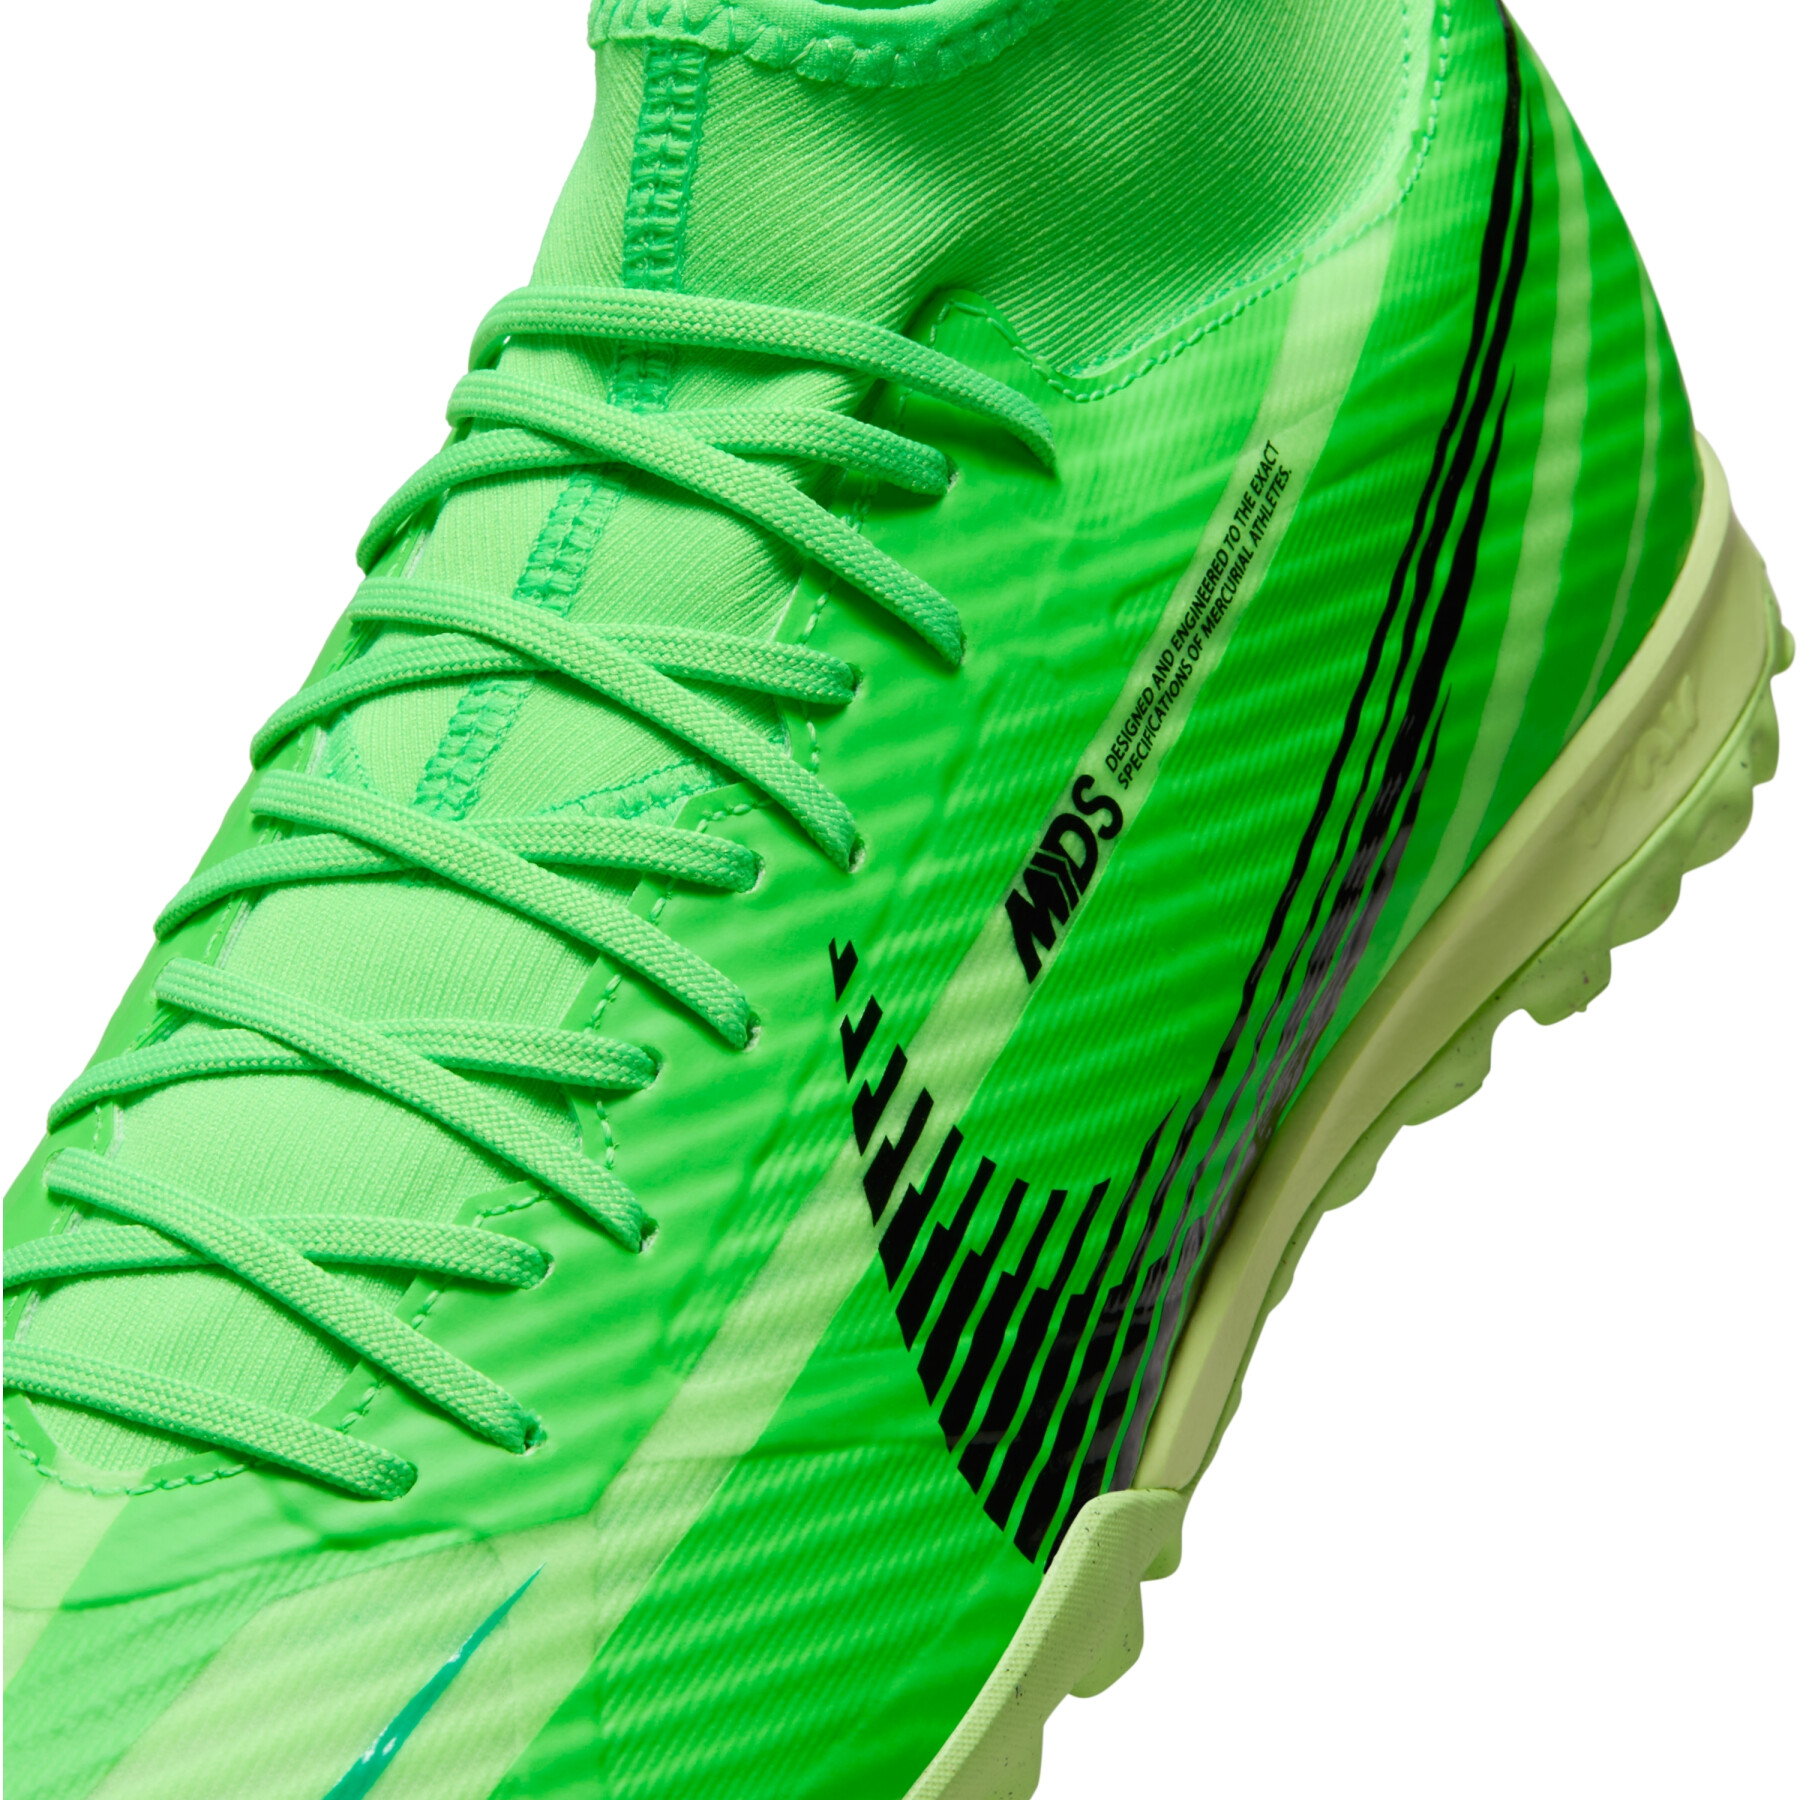 Chaussures de football Nike Zoom Superfly 9 Academy MDS TF